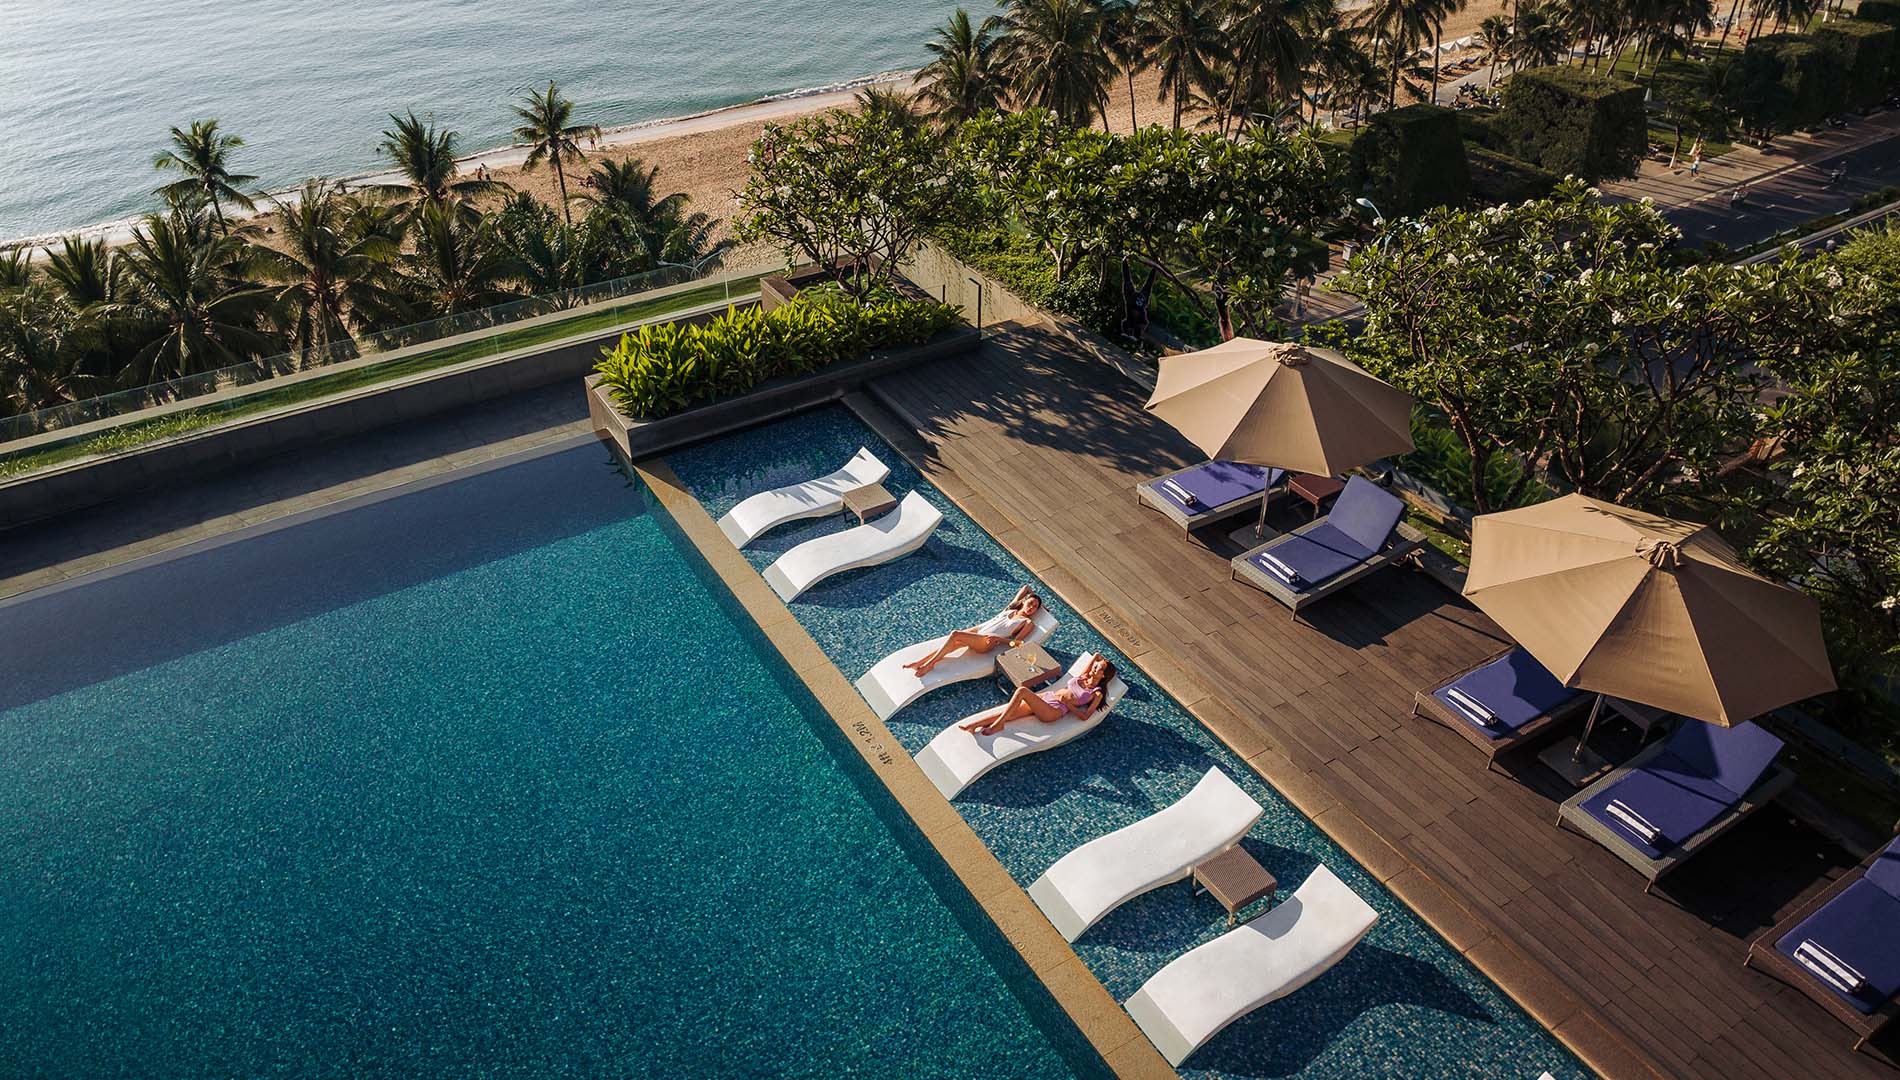 Aerial view of two people sunning on lounge chairs next to a swimming pool in Nha Trang, Vietnam